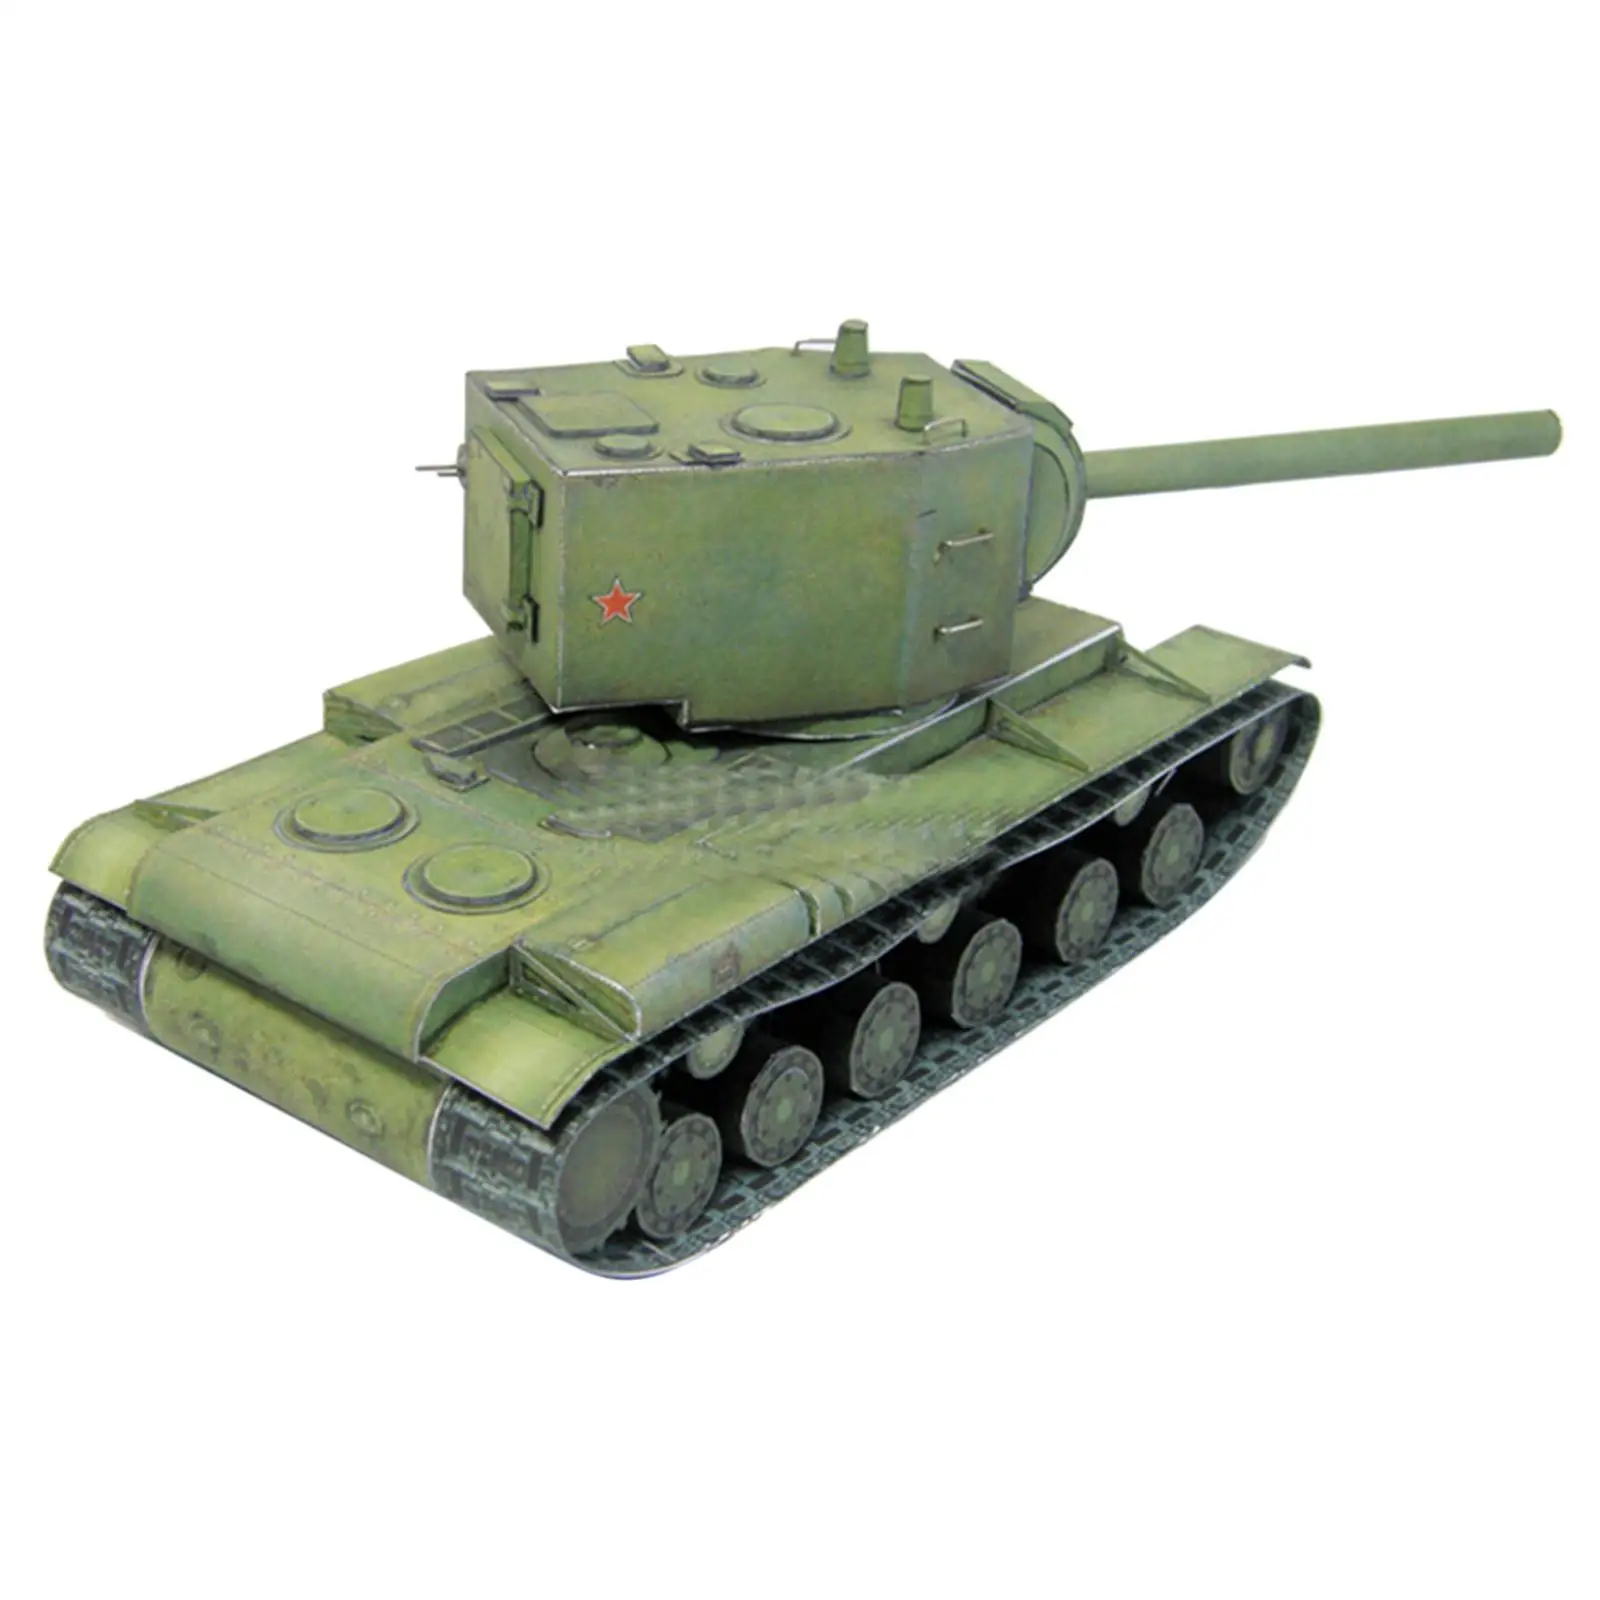 

1:35 Tank Vehicle DIY Assemble Soviet Model Kit Model Building Kits for Gifts Boys Tabletop Decor Collectables Easily Assemble